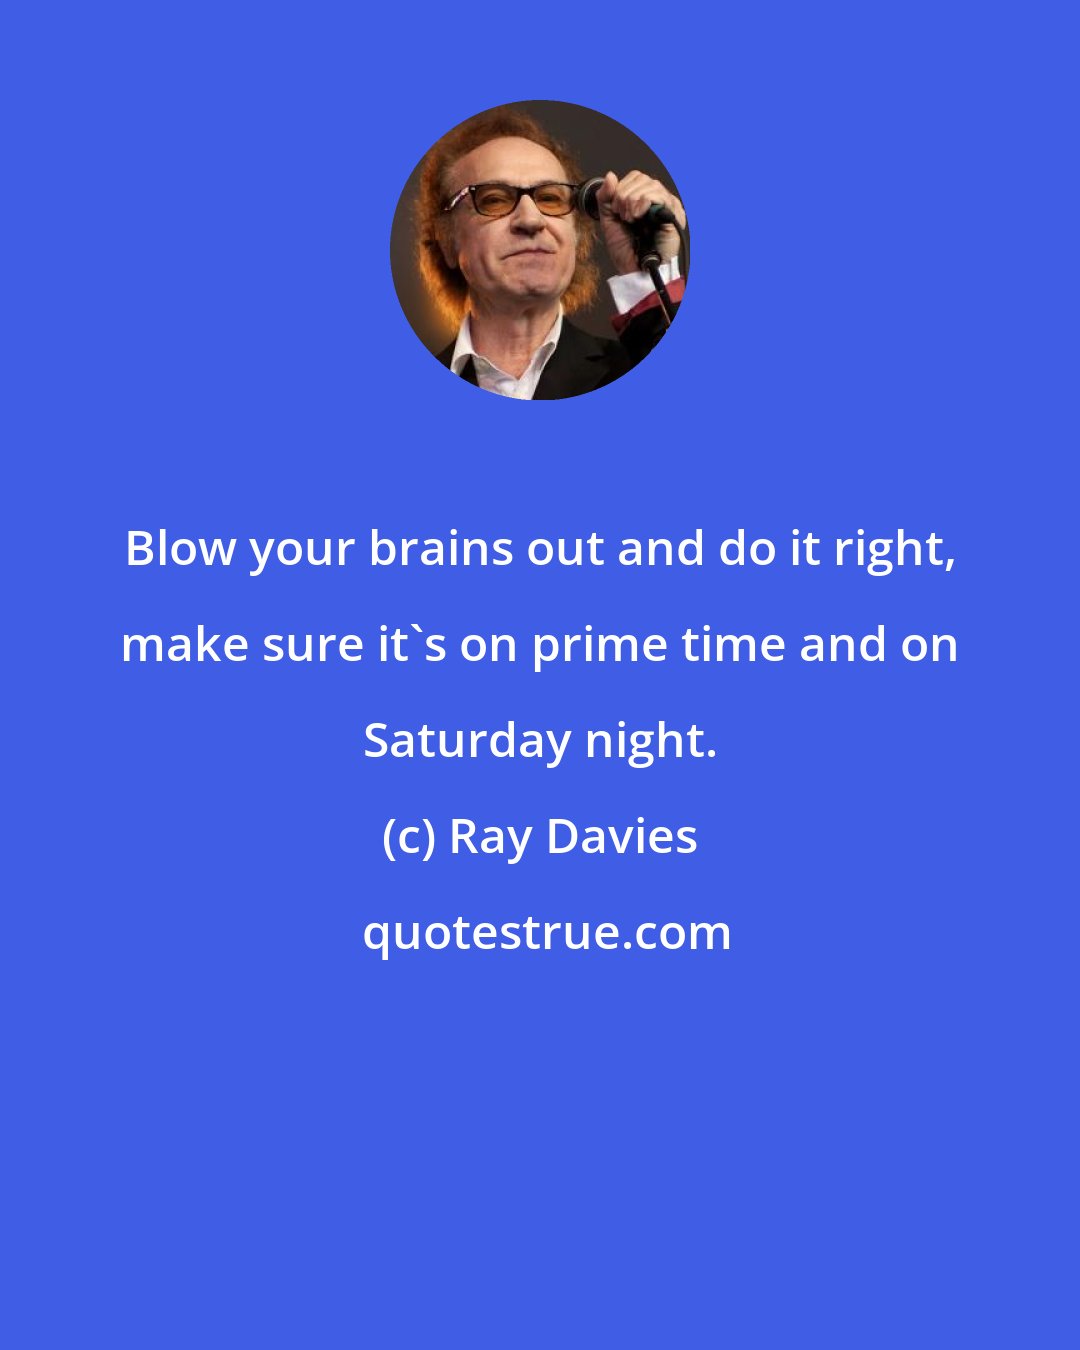 Ray Davies: Blow your brains out and do it right, make sure it's on prime time and on Saturday night.